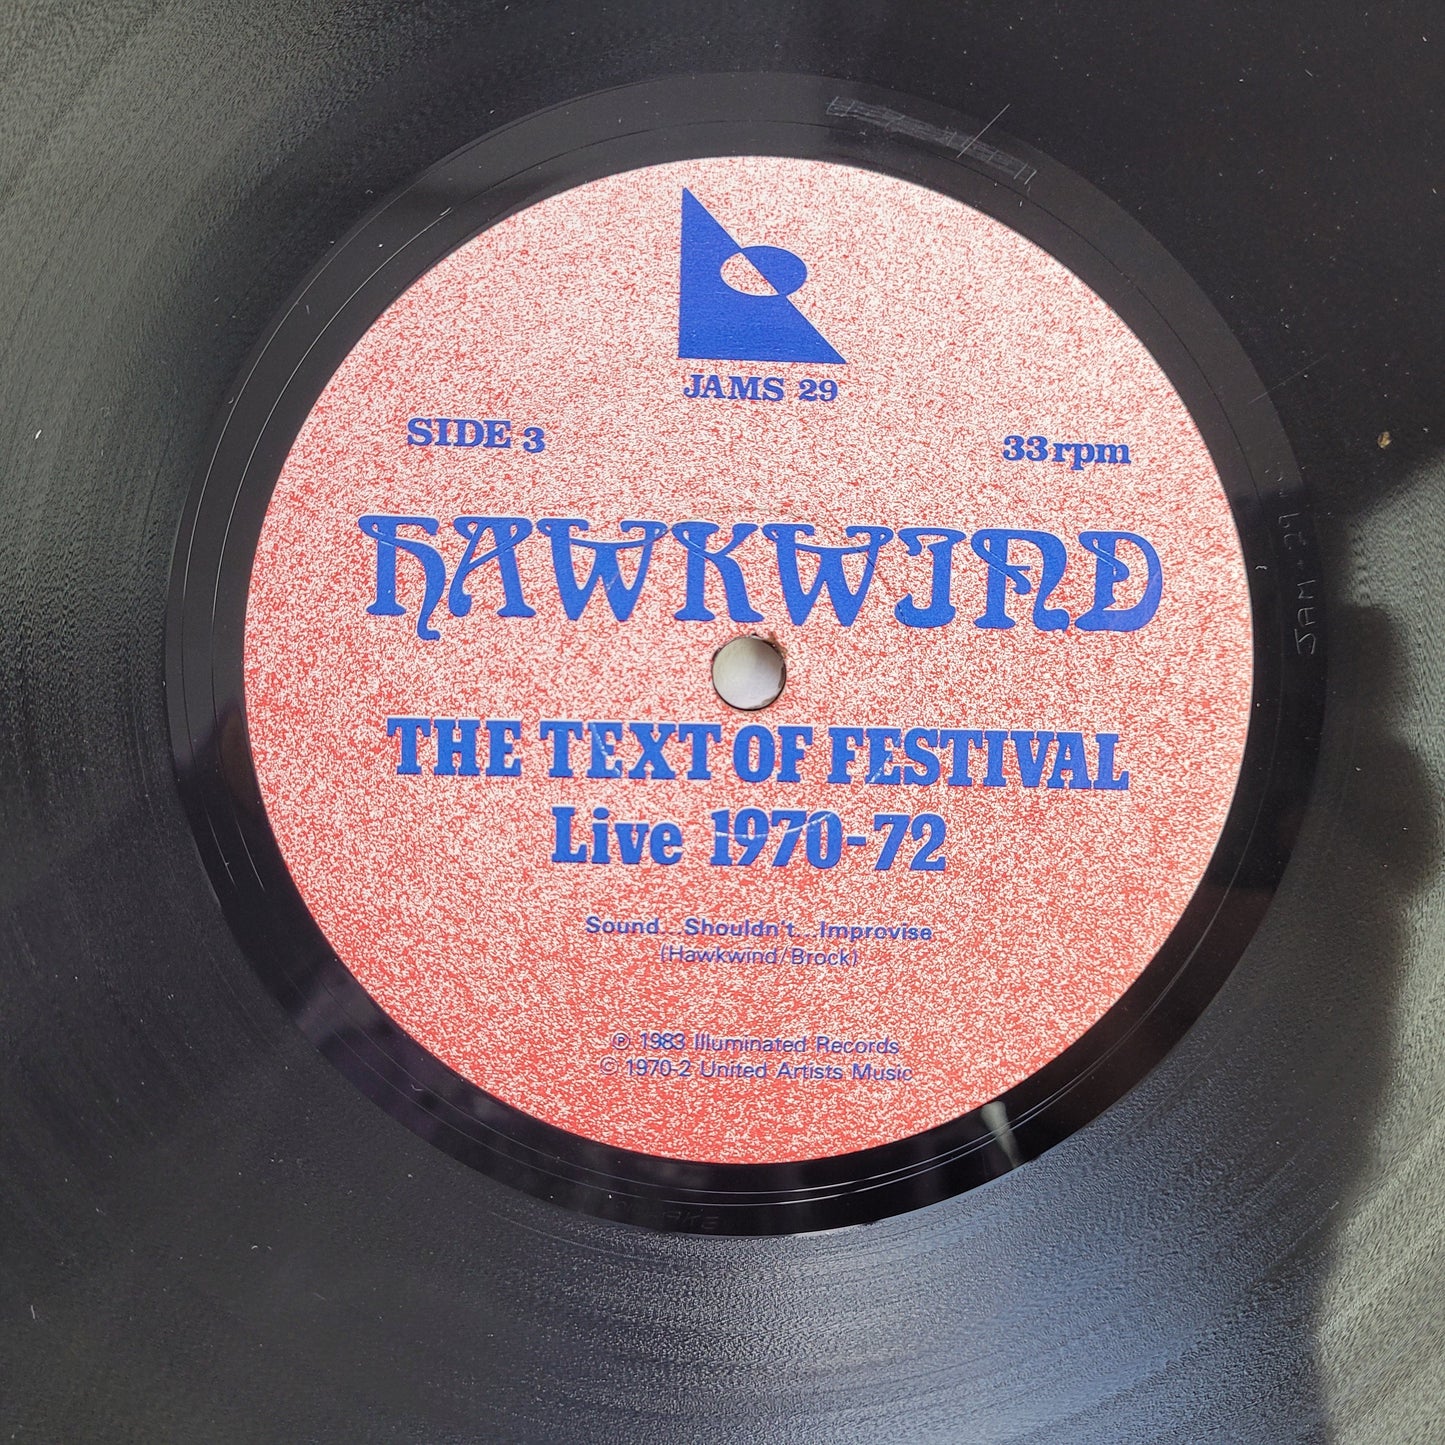 Hawkwind,The Text Of Festival - Hawkwind Live 1970-72, LP Album